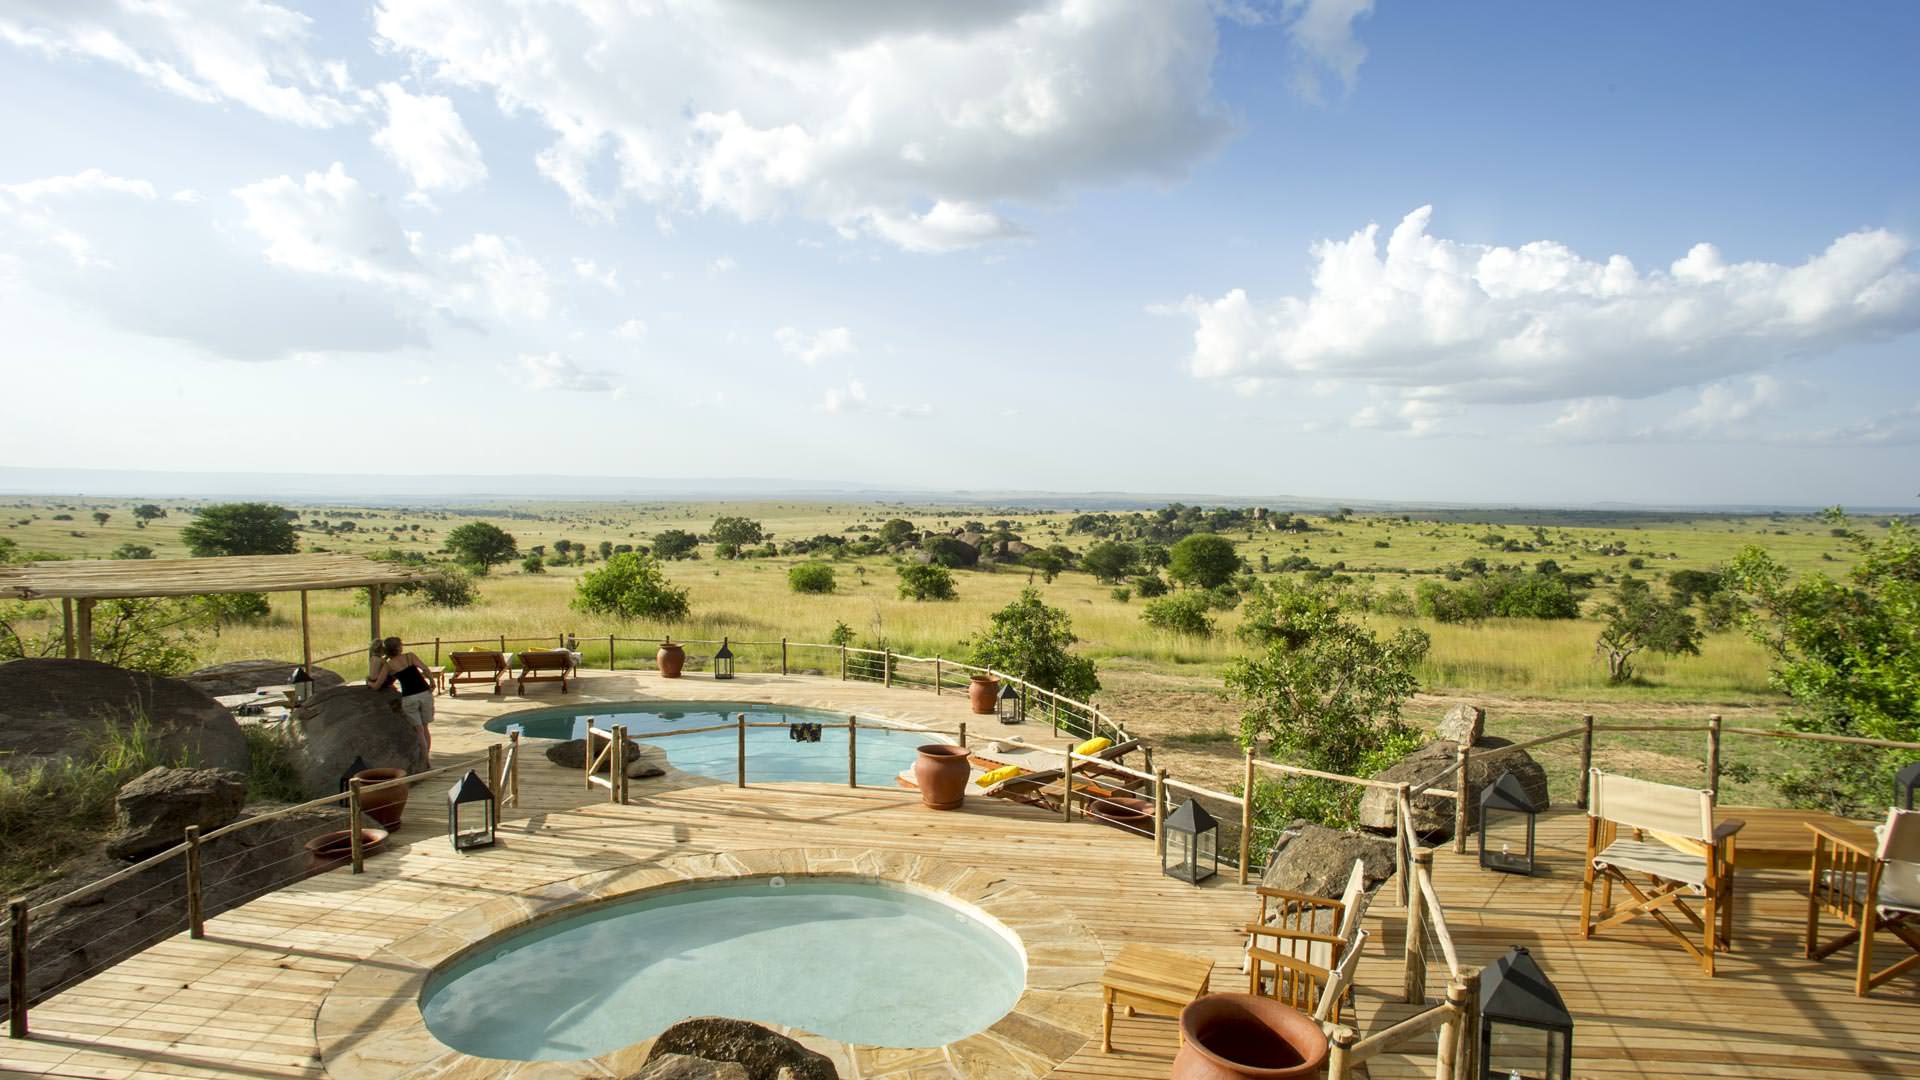 Pool with view over the Serengeti